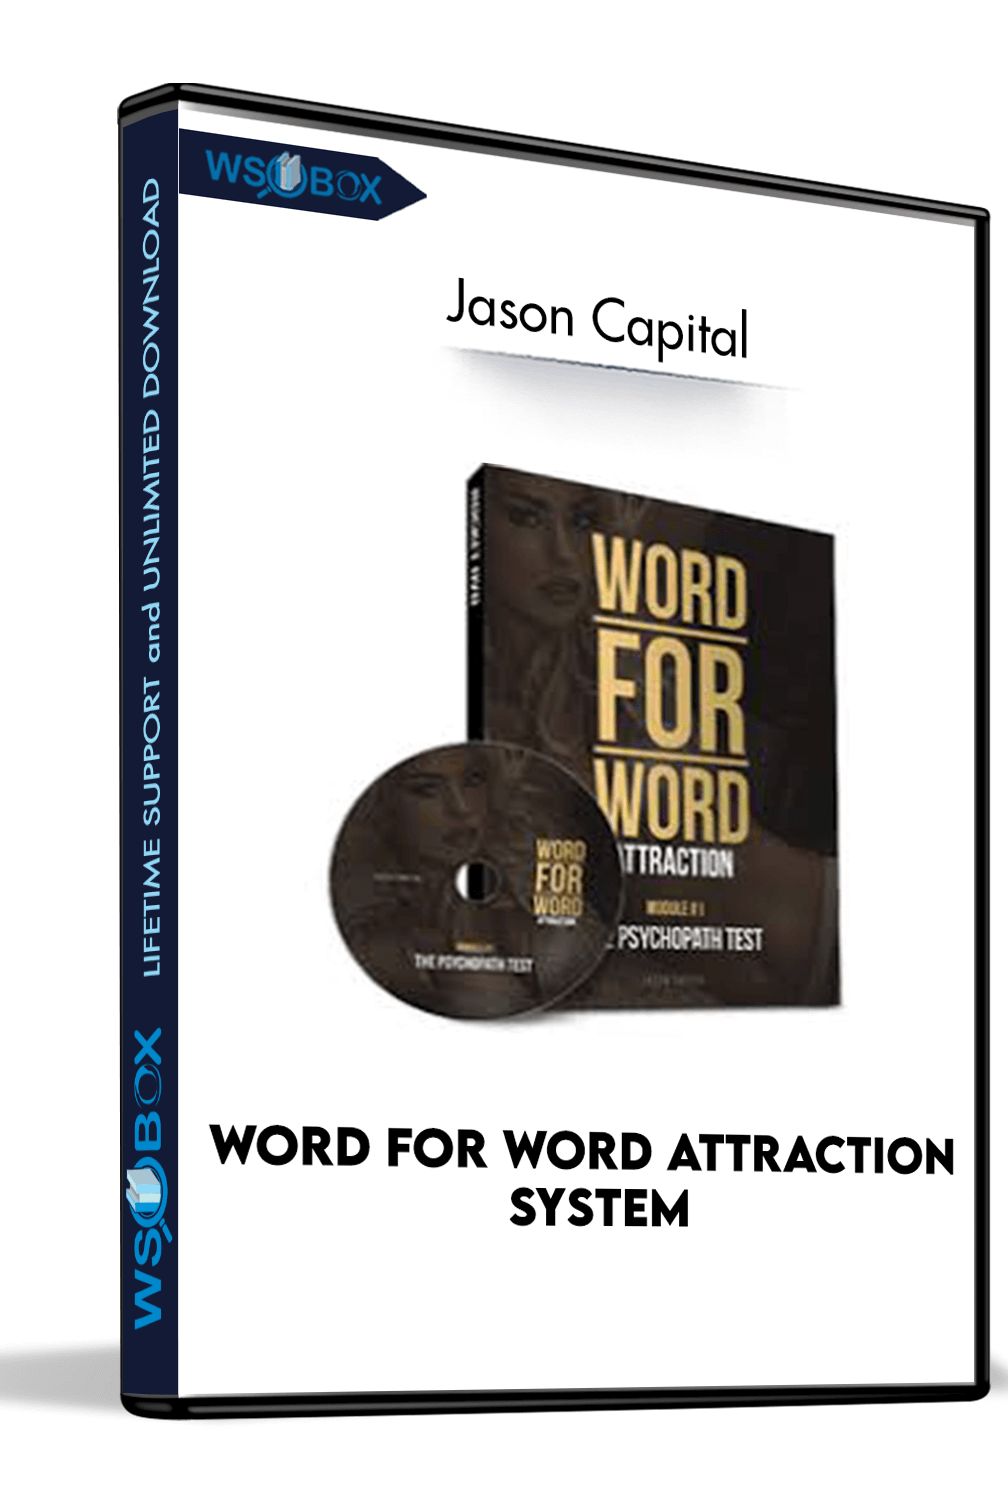 word-for-word-attraction-system-jason-capital